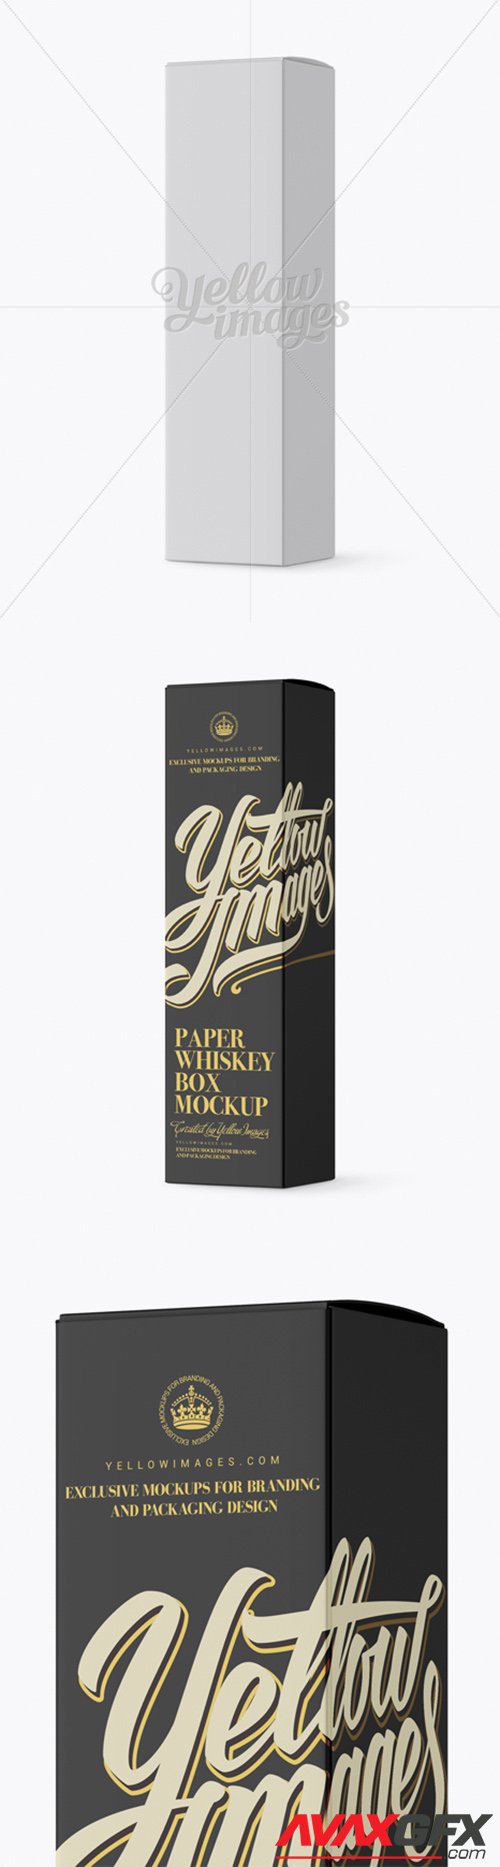 Download Paper Whisky Box Mockup Halfside View 16150 Tif Avaxgfx All Downloads That You Need In One Place Graphic From Nitroflare Rapidgator Yellowimages Mockups